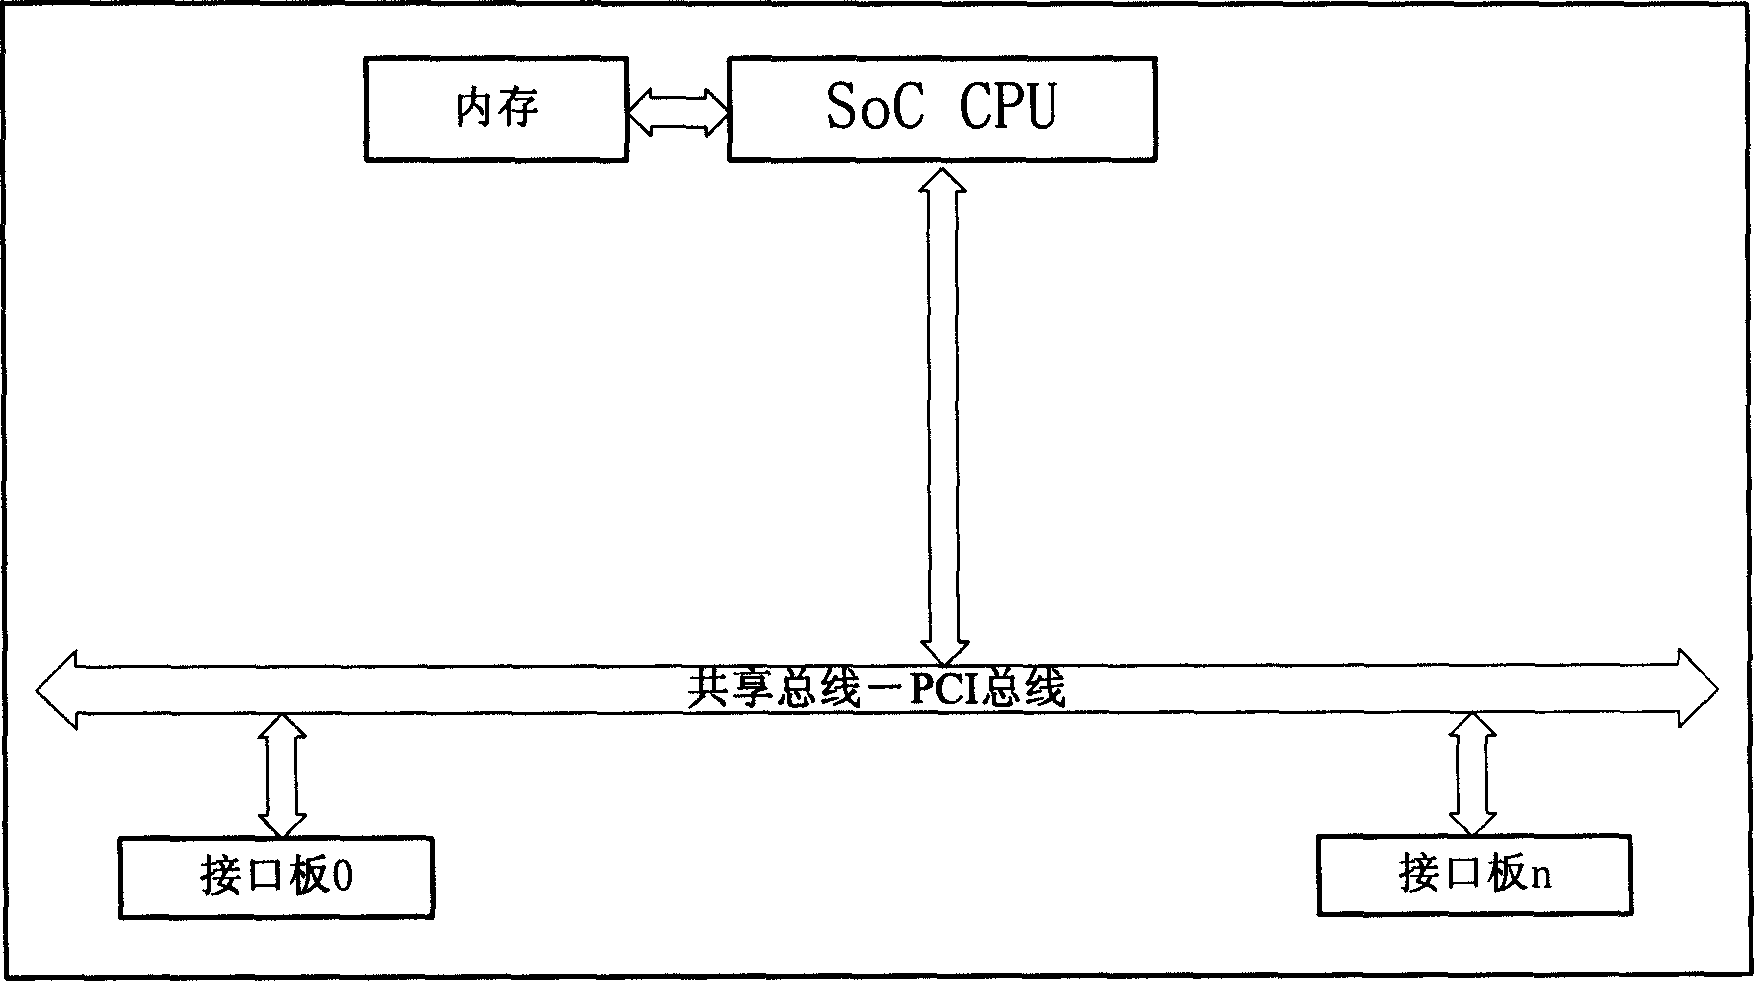 Integrated router based on PCI Express bus